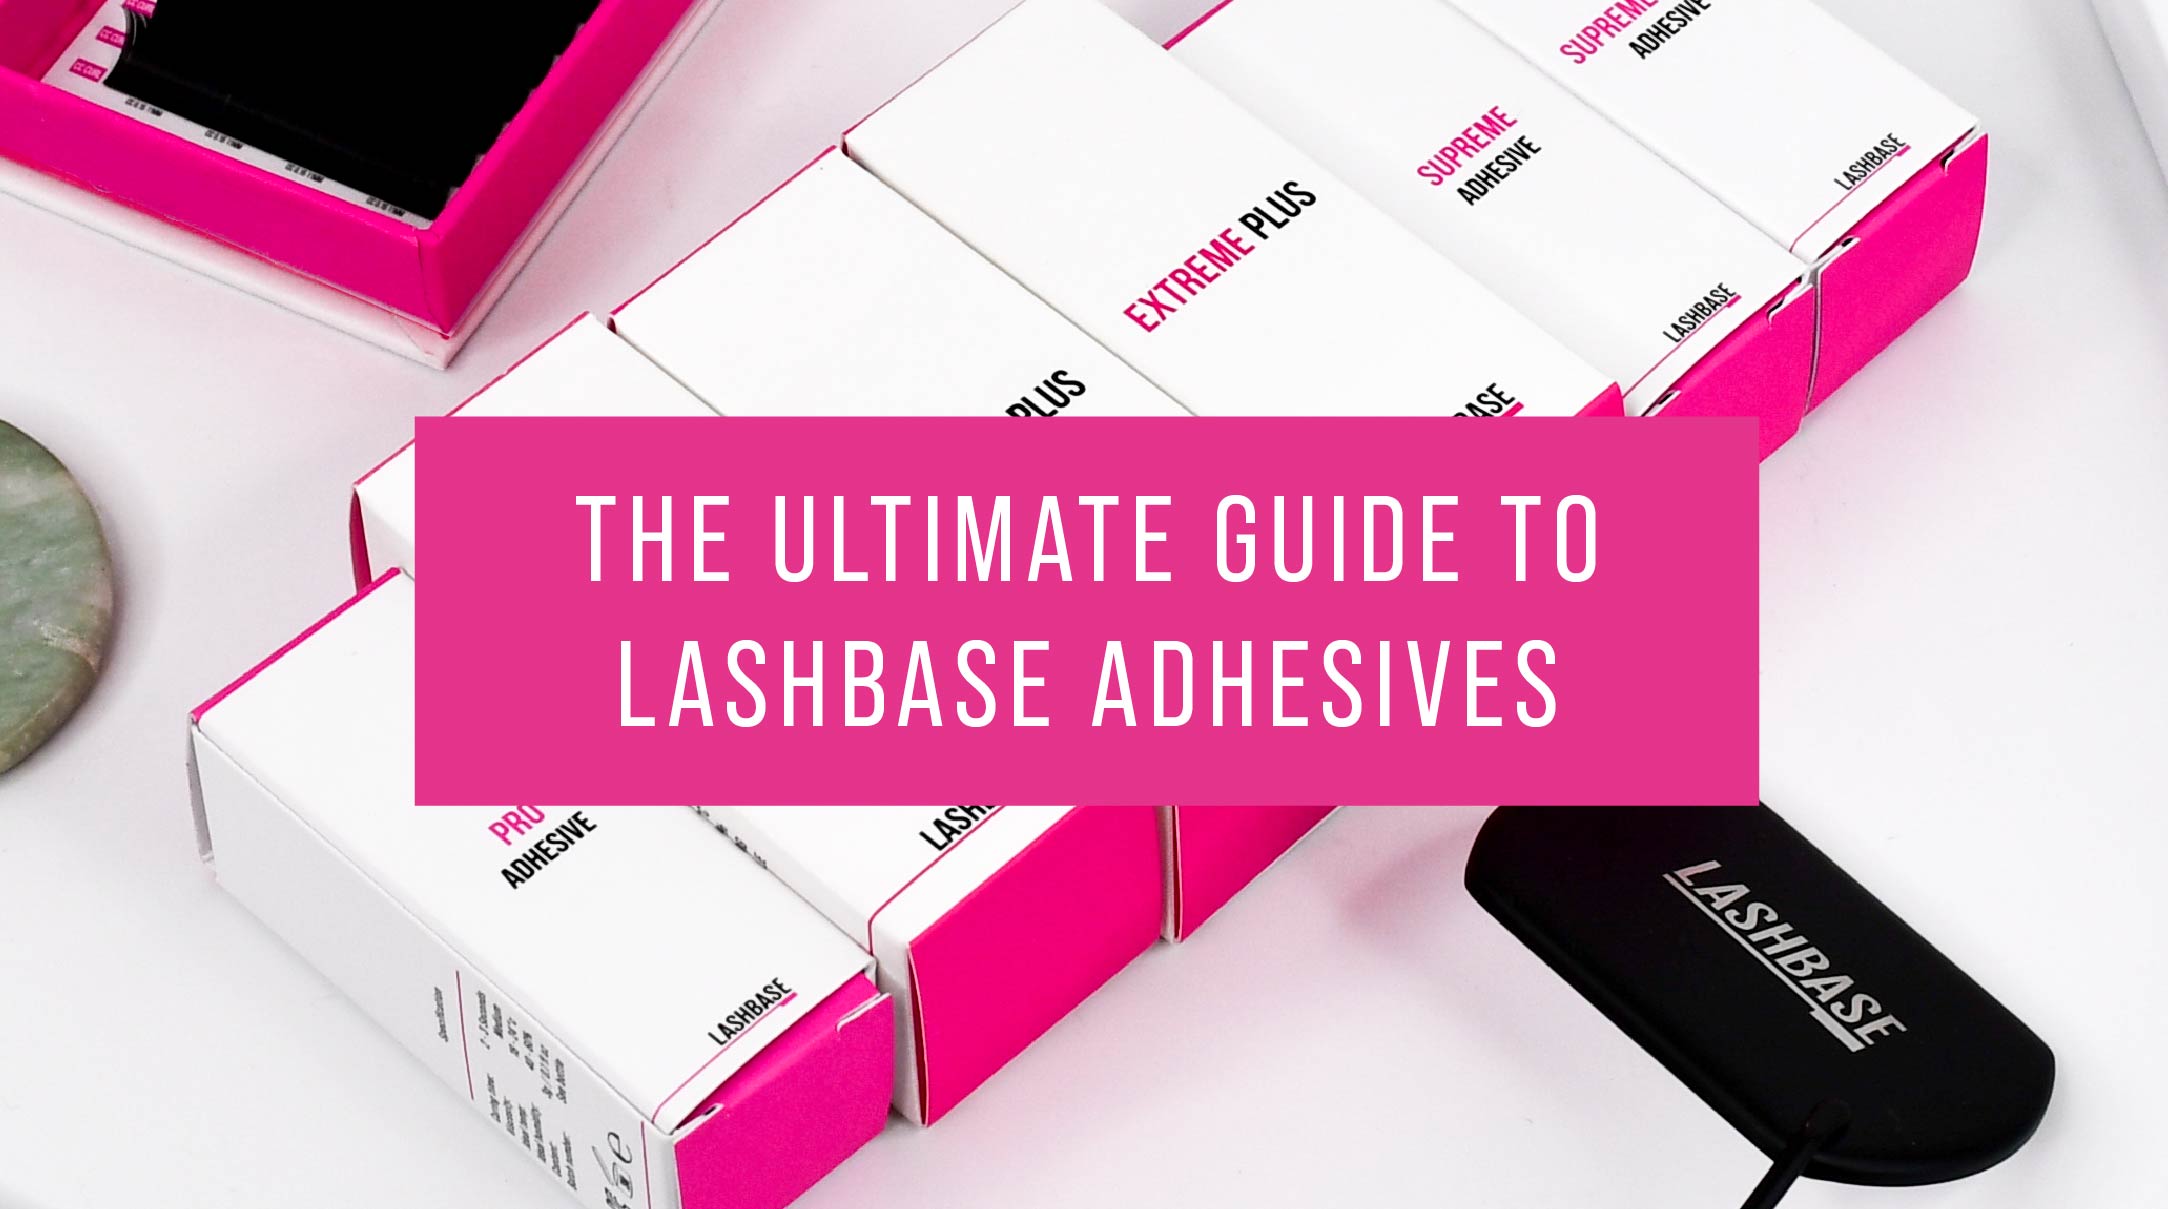 The Ultimate Guide to LashBase Adhesives